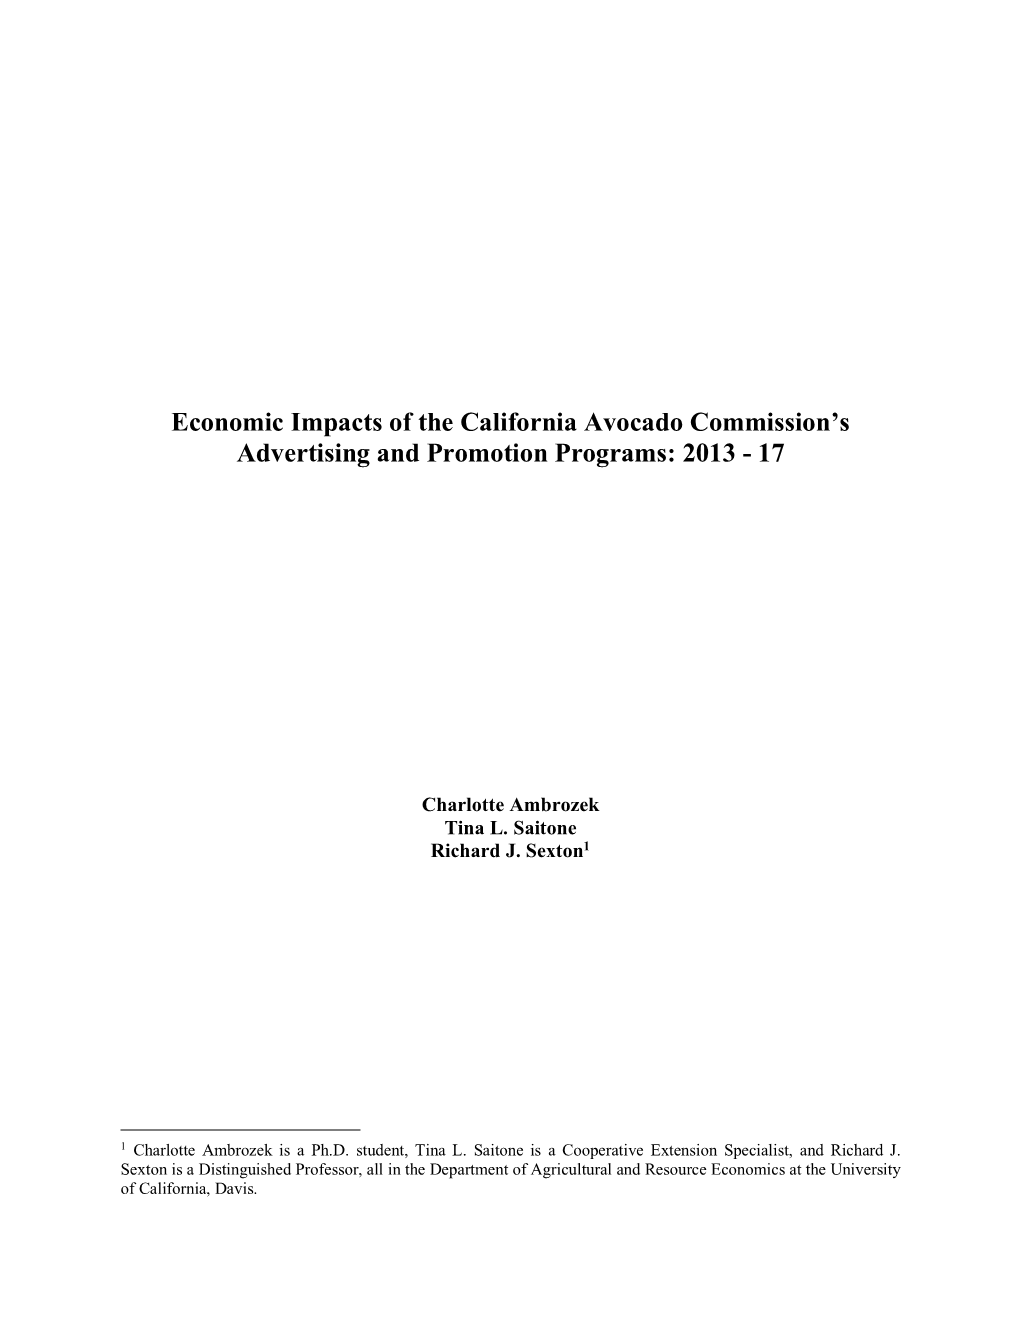 Economic Impacts of California Avocado Commission Advertising and Promotion Programs, 2013